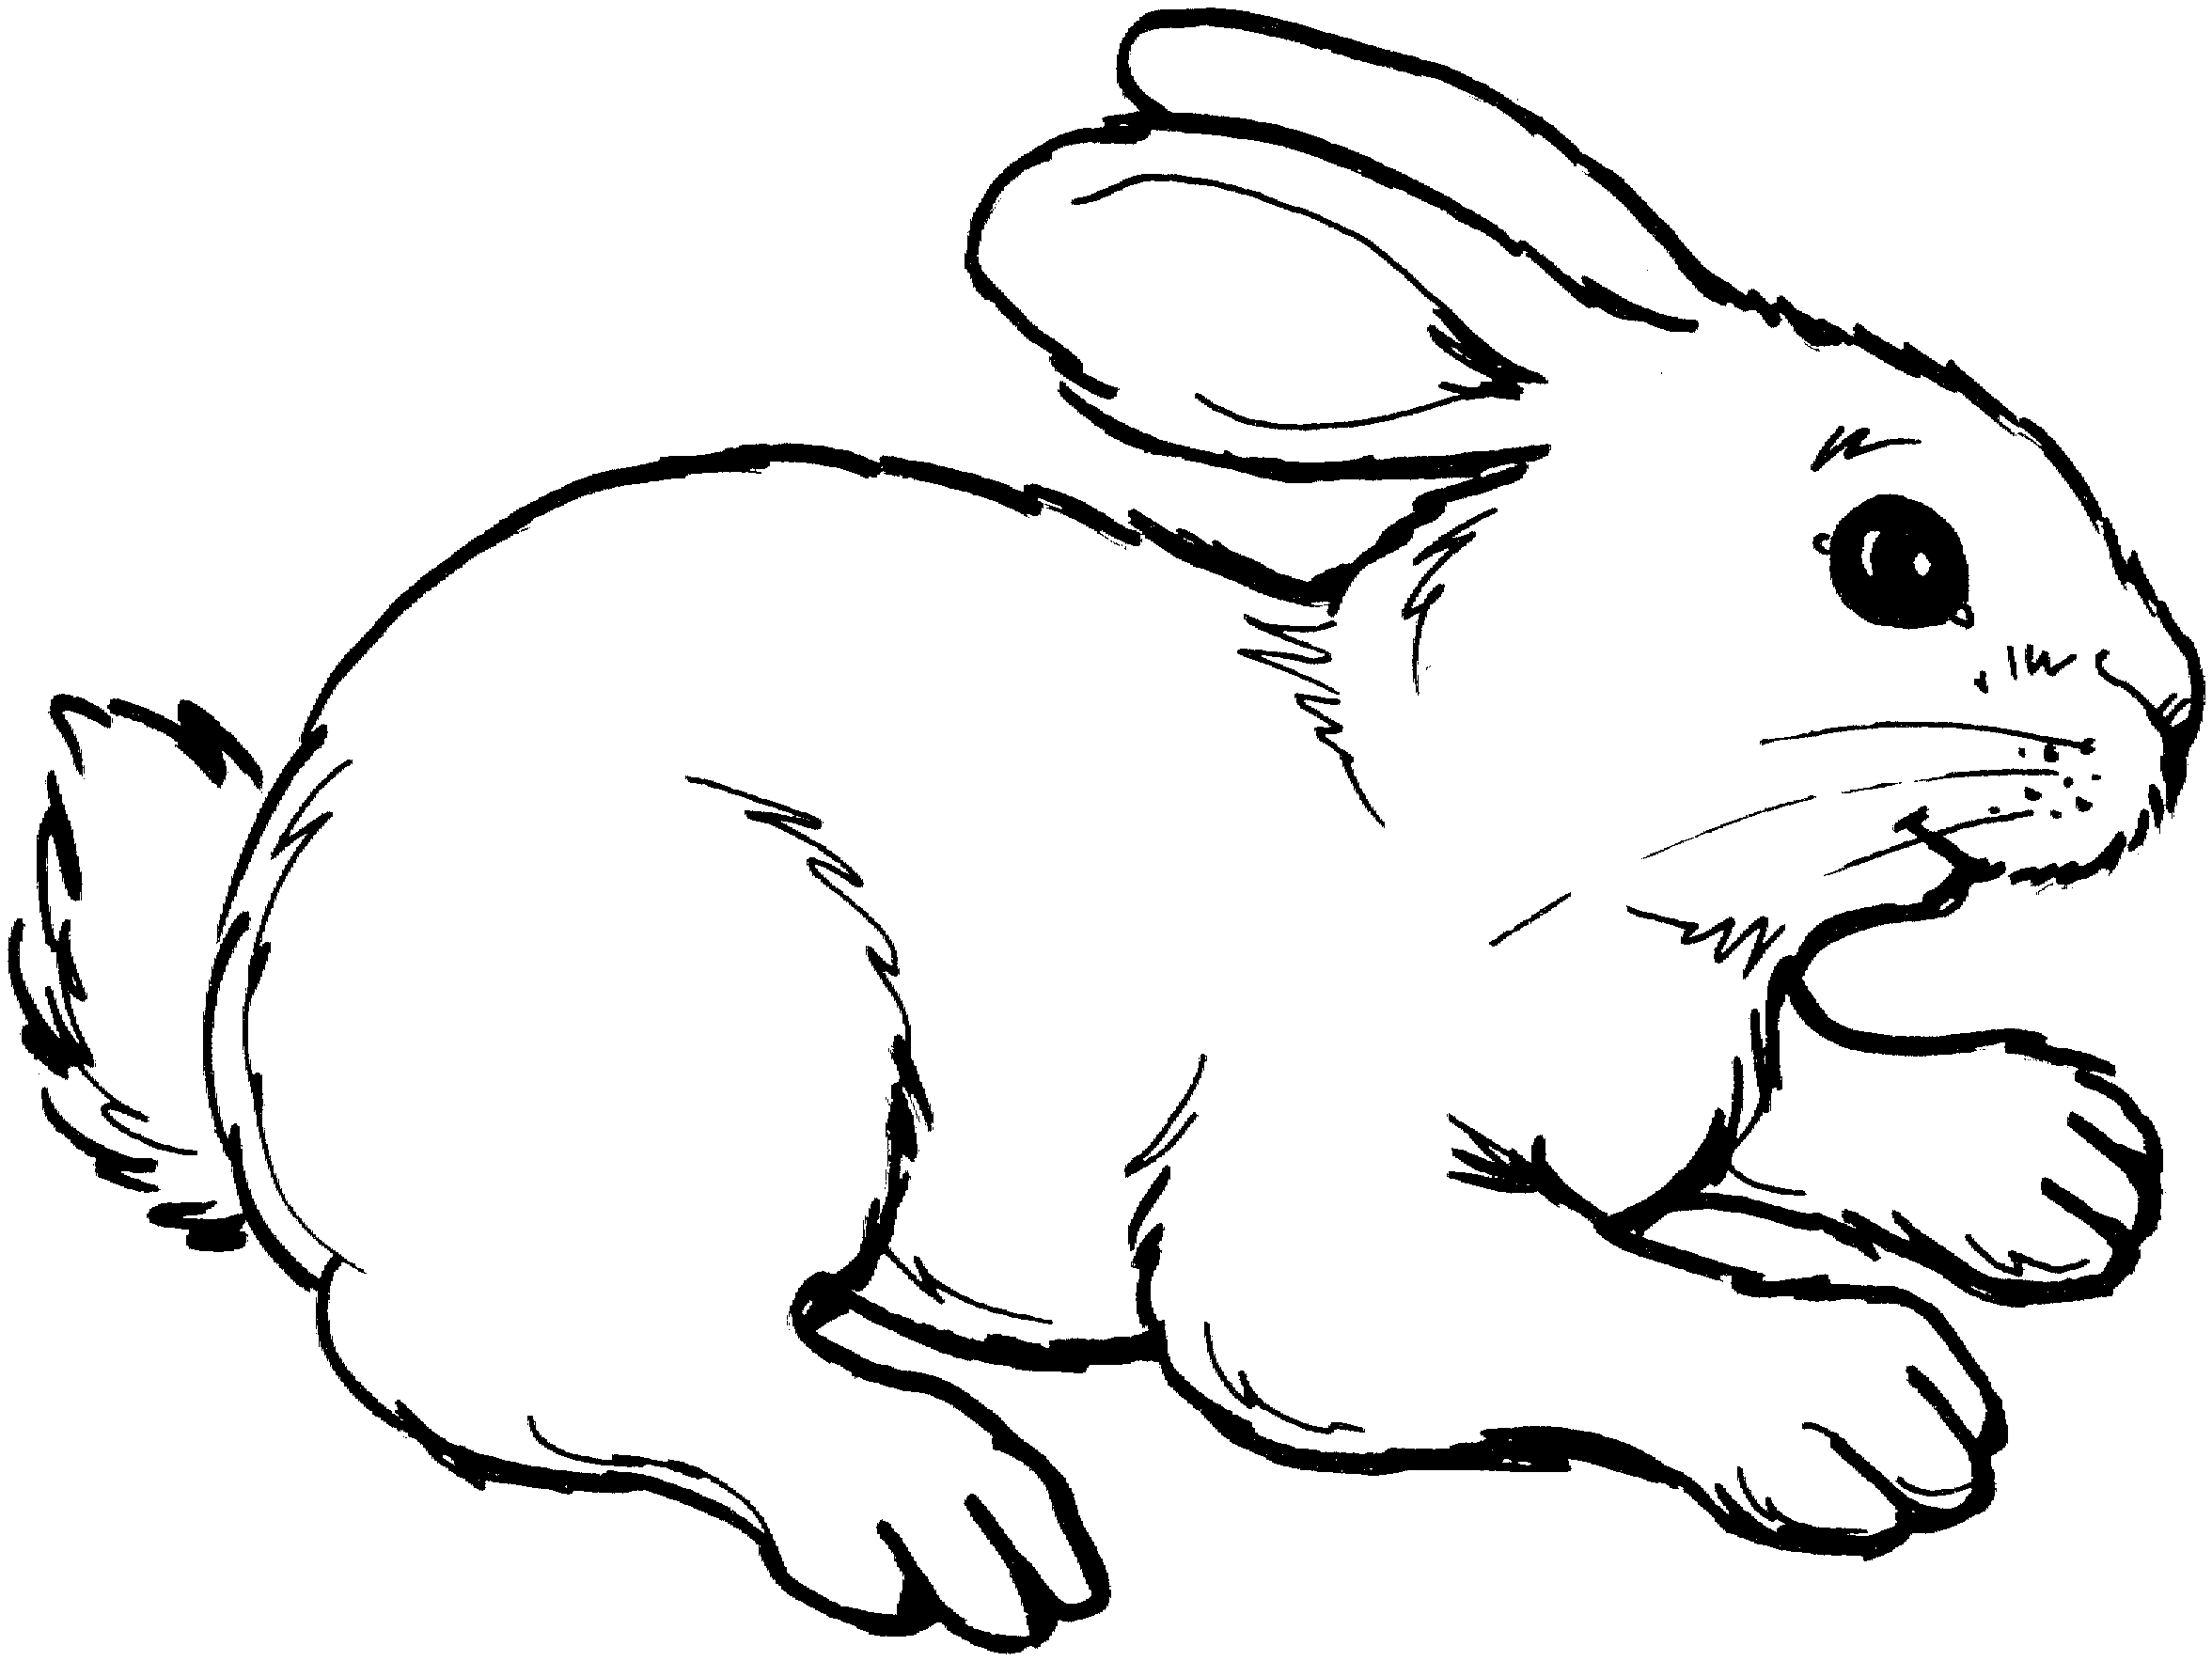 rabbit picture for colouring free printable rabbit coloring pages for kids colouring rabbit picture for 